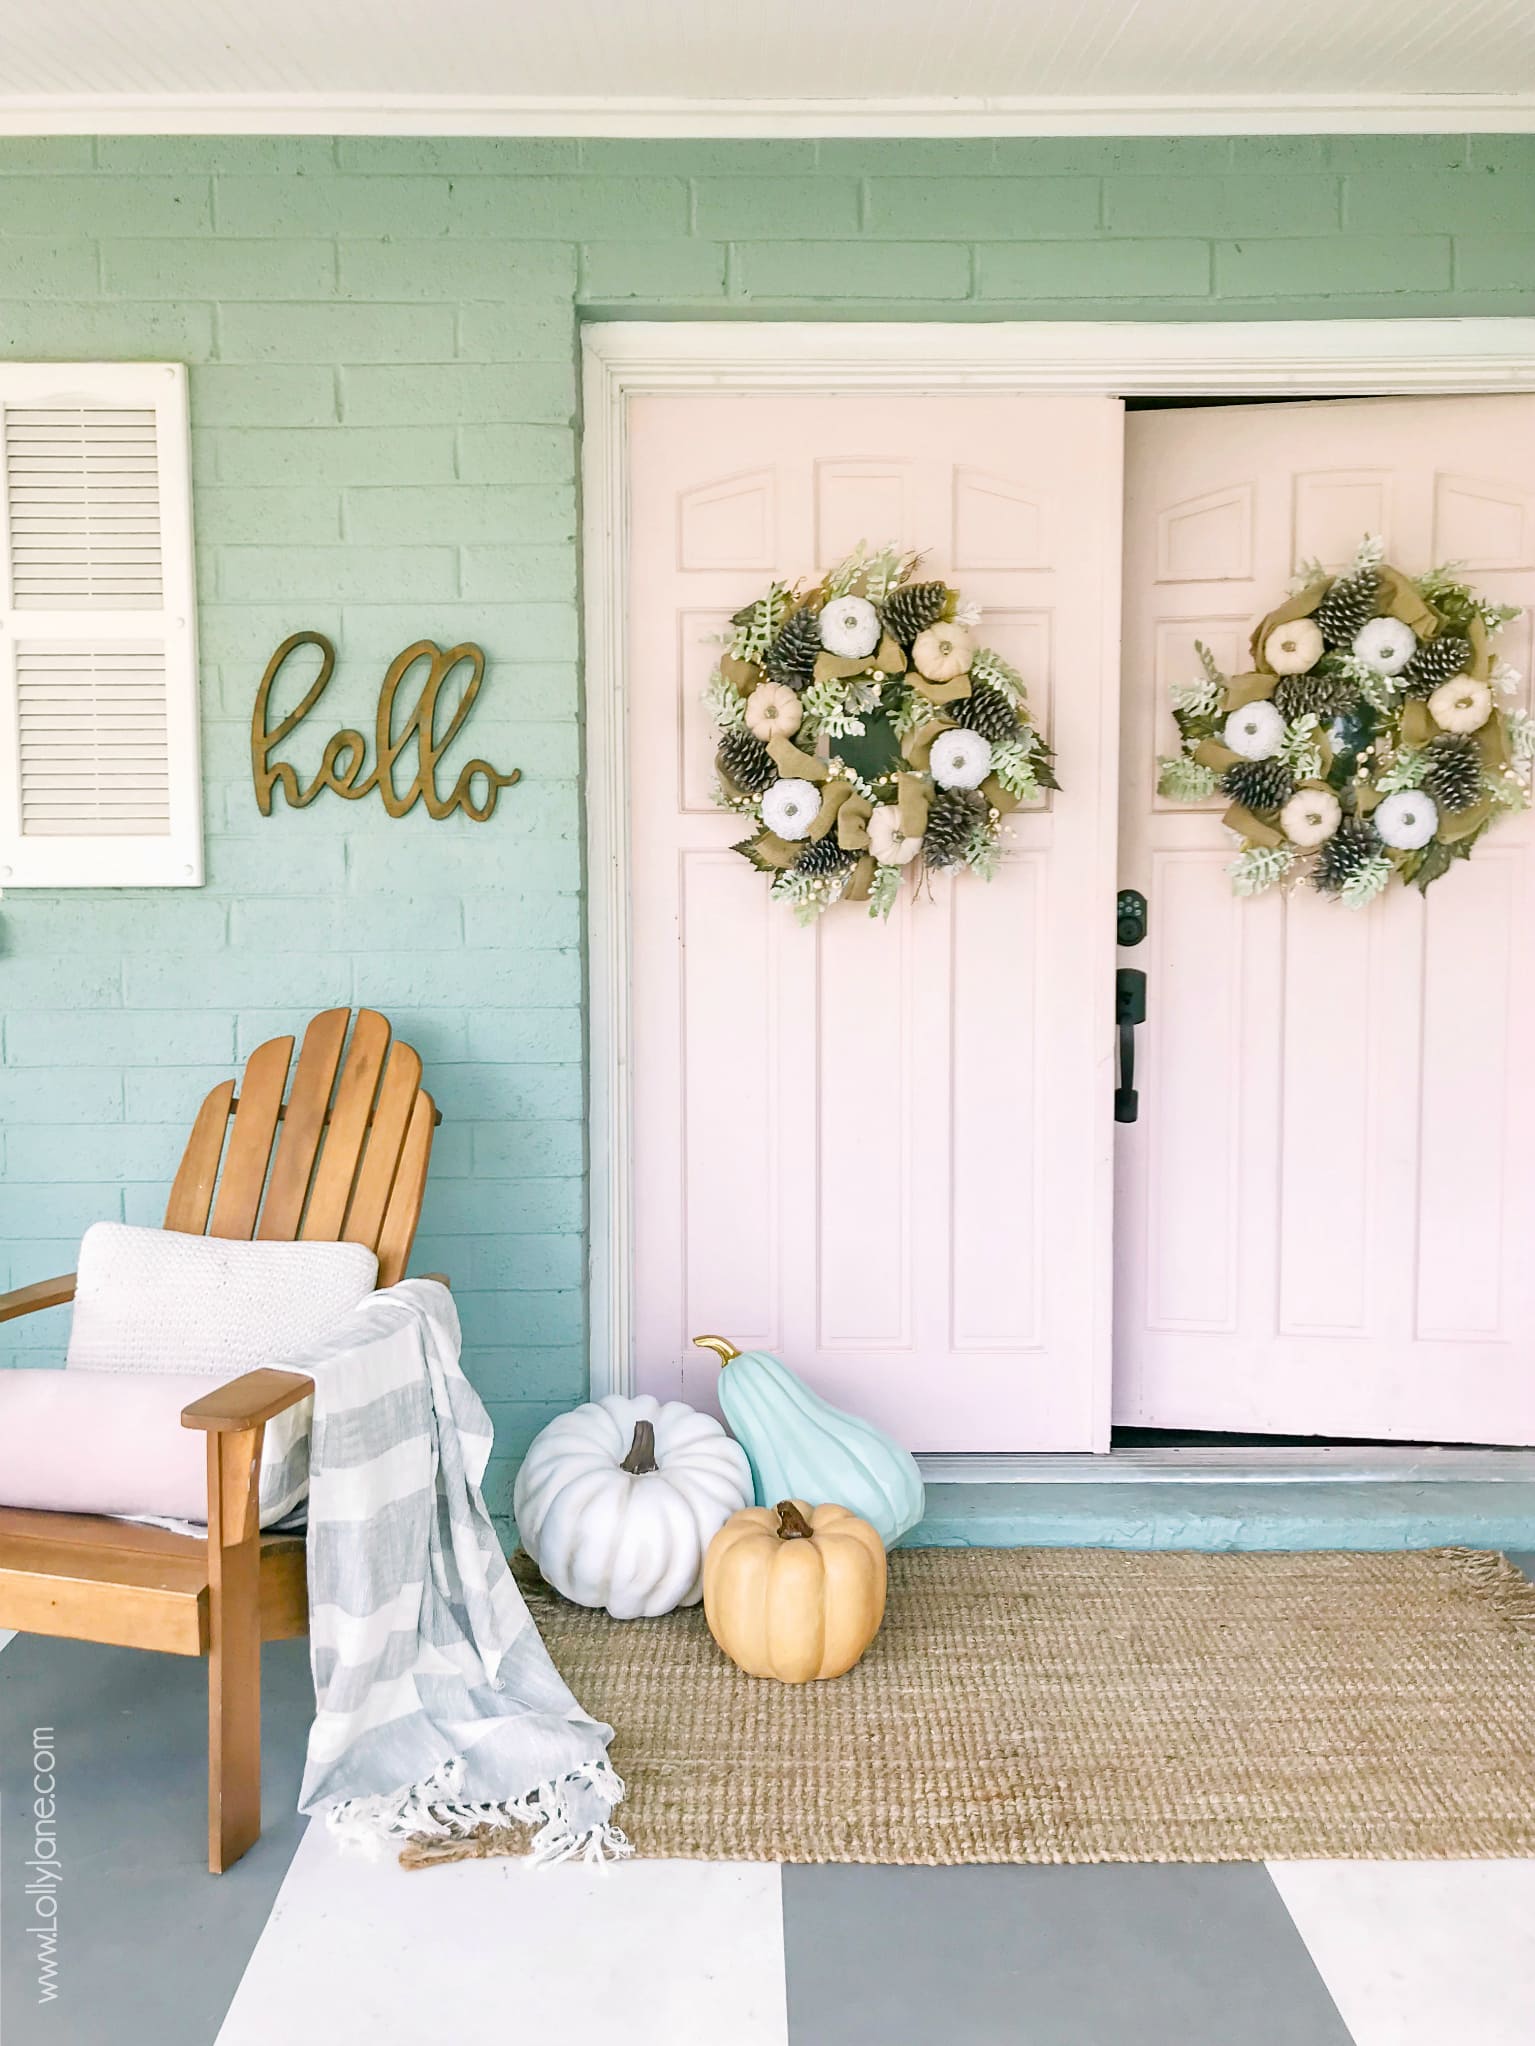 Add these simple touches of Fall Decor to make your home feel like it's ready for autumn without breaking the bank. So pretty! #diy #falldecor #homedecor #fallhomedecor